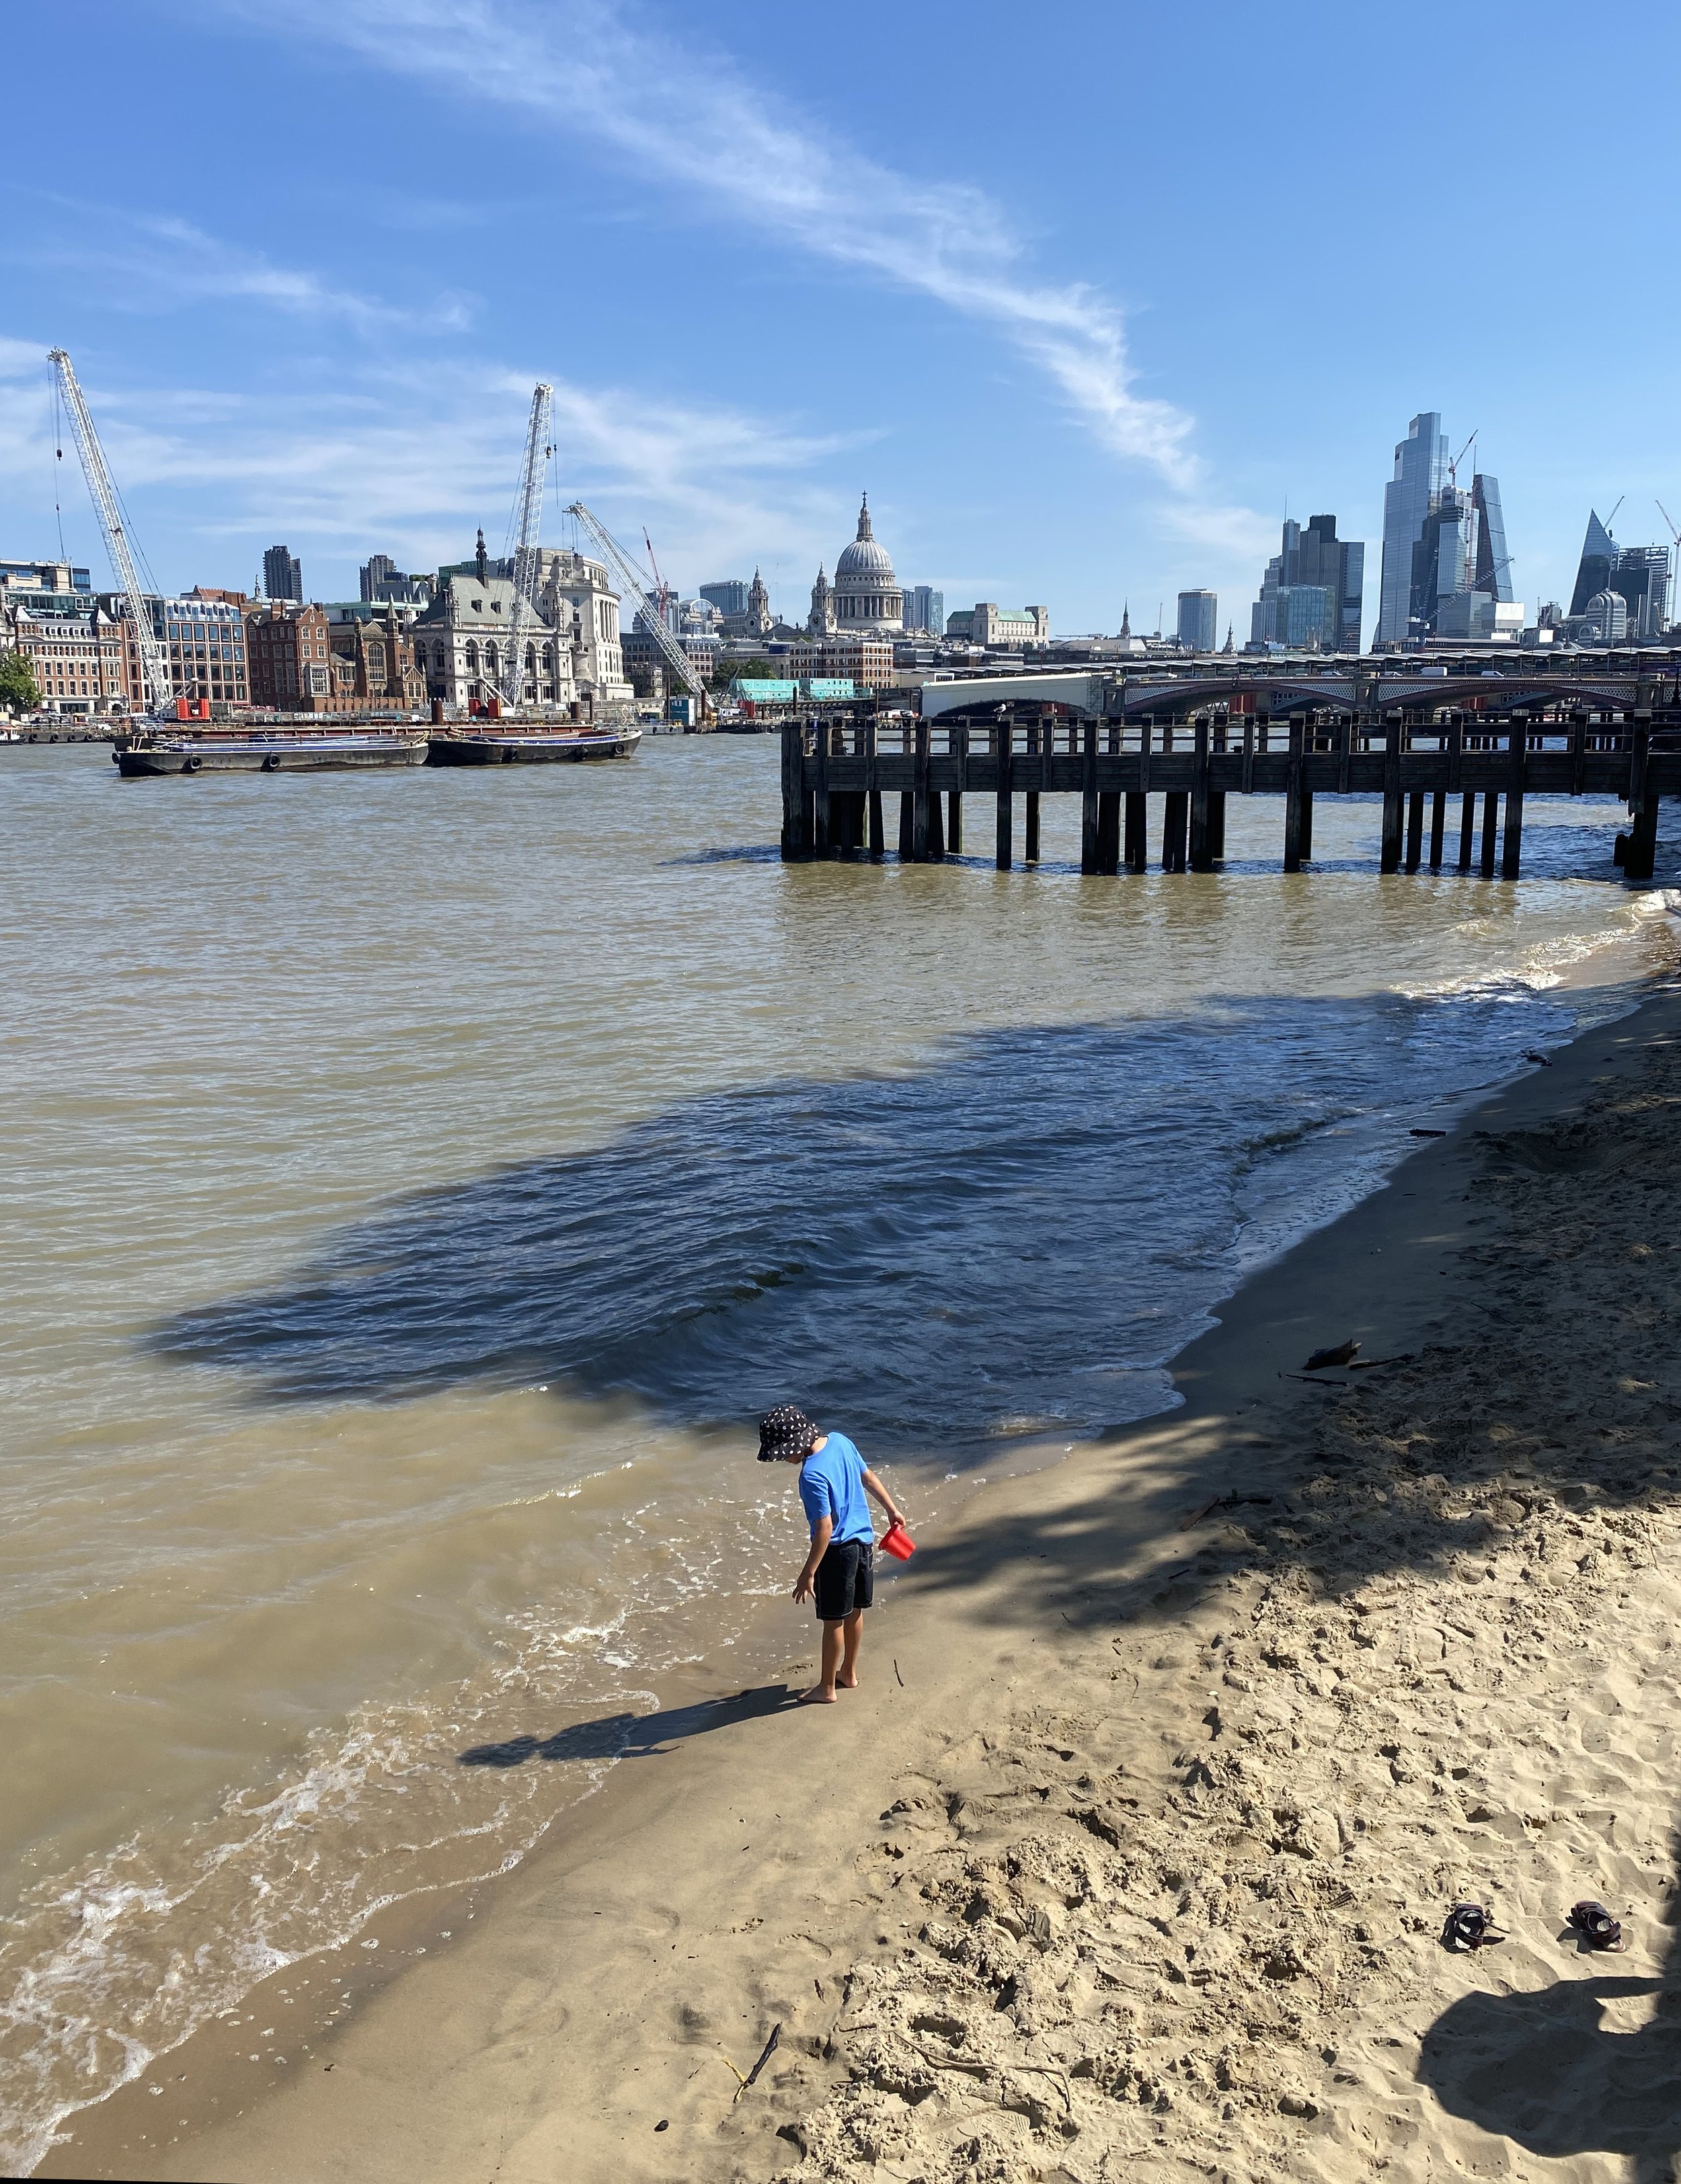  A boy explore a beach on the Thames River Southbank boardwalk.  My parents often walked along the river’s Southbank. 